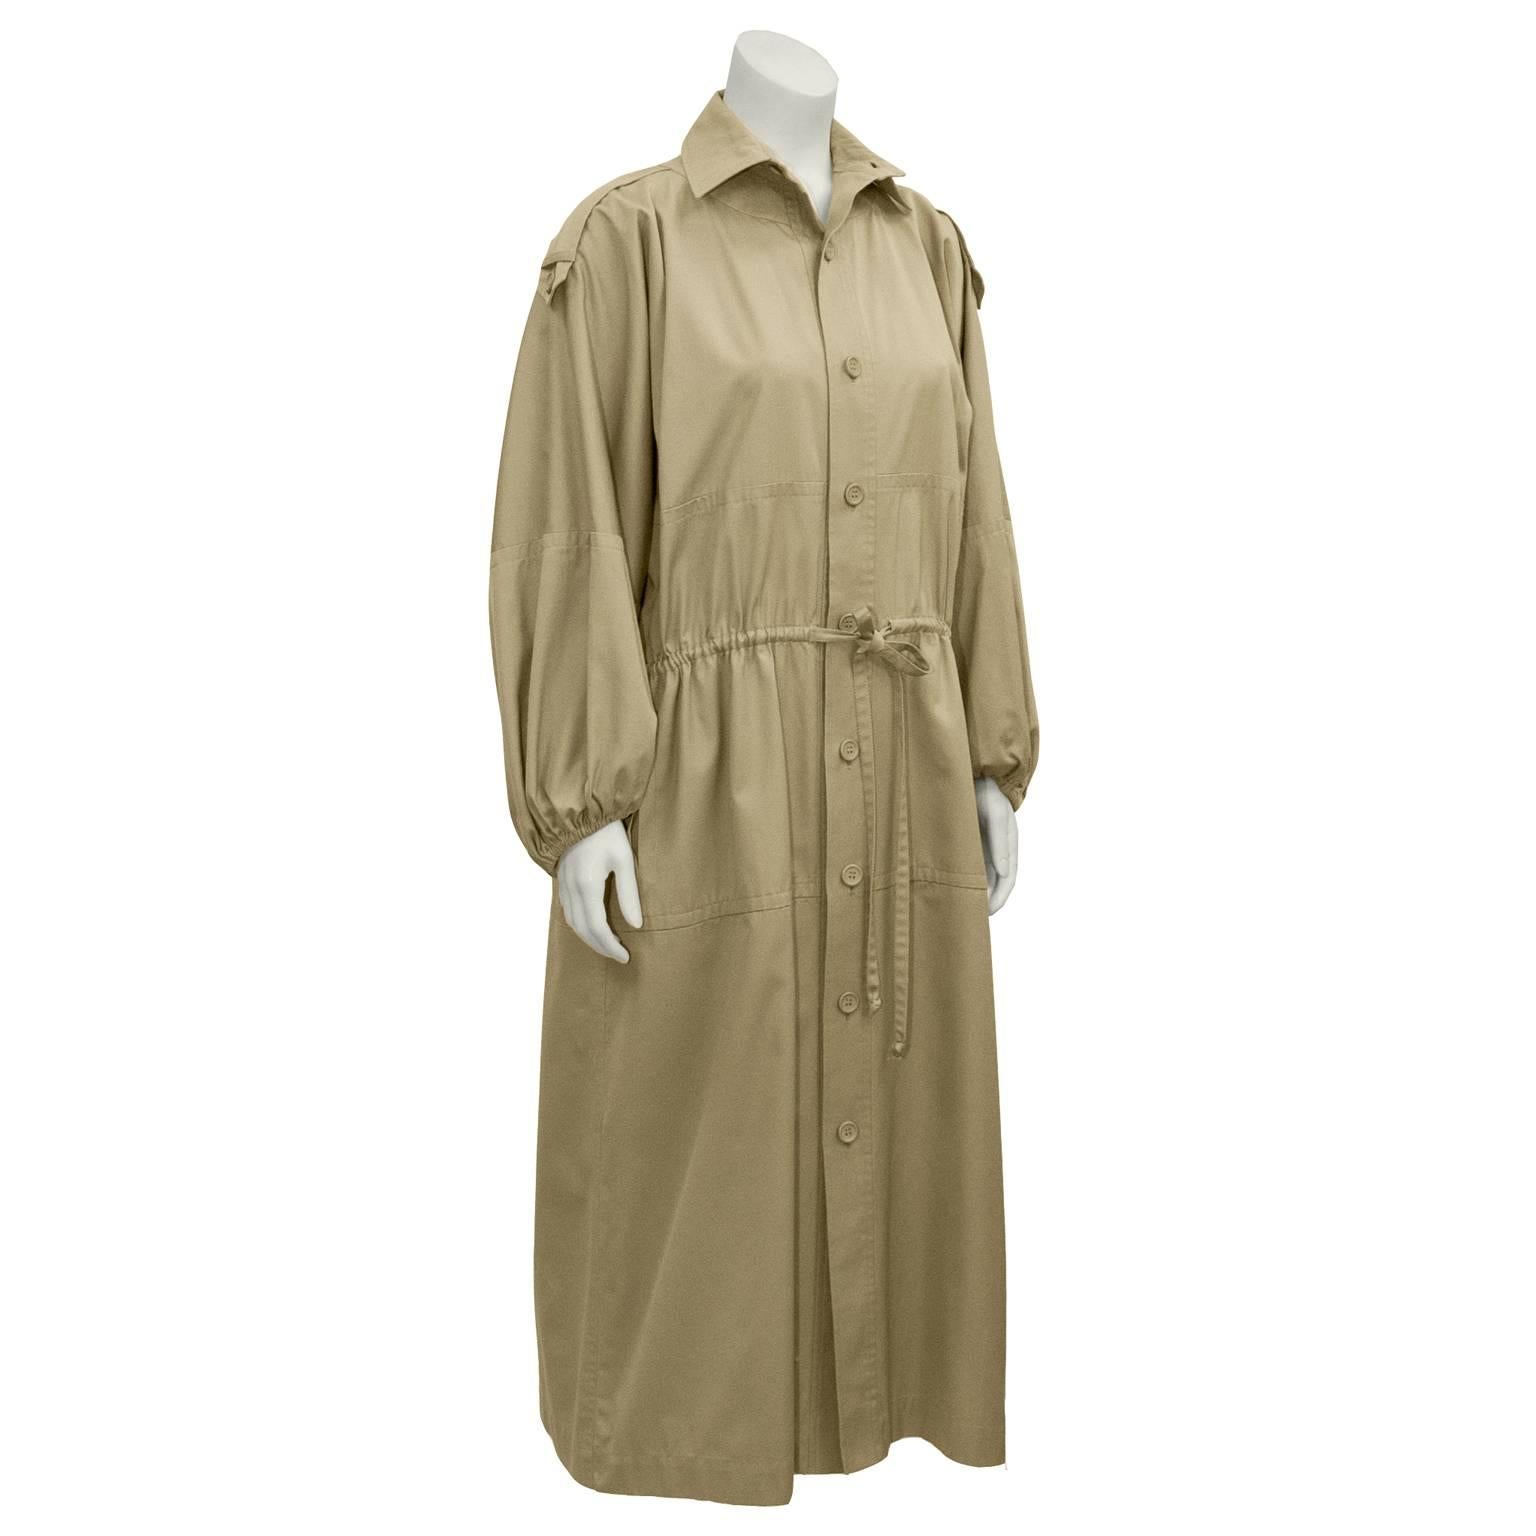 This amazing oversized Yves Saint Laurent beige cotton twill duster coat is a  piece from his safari collection in the 1970's. Shirt collar, drop shoulder with epaulets. Front button closure with plastic beige buttons. Sleeves are a loose lantern